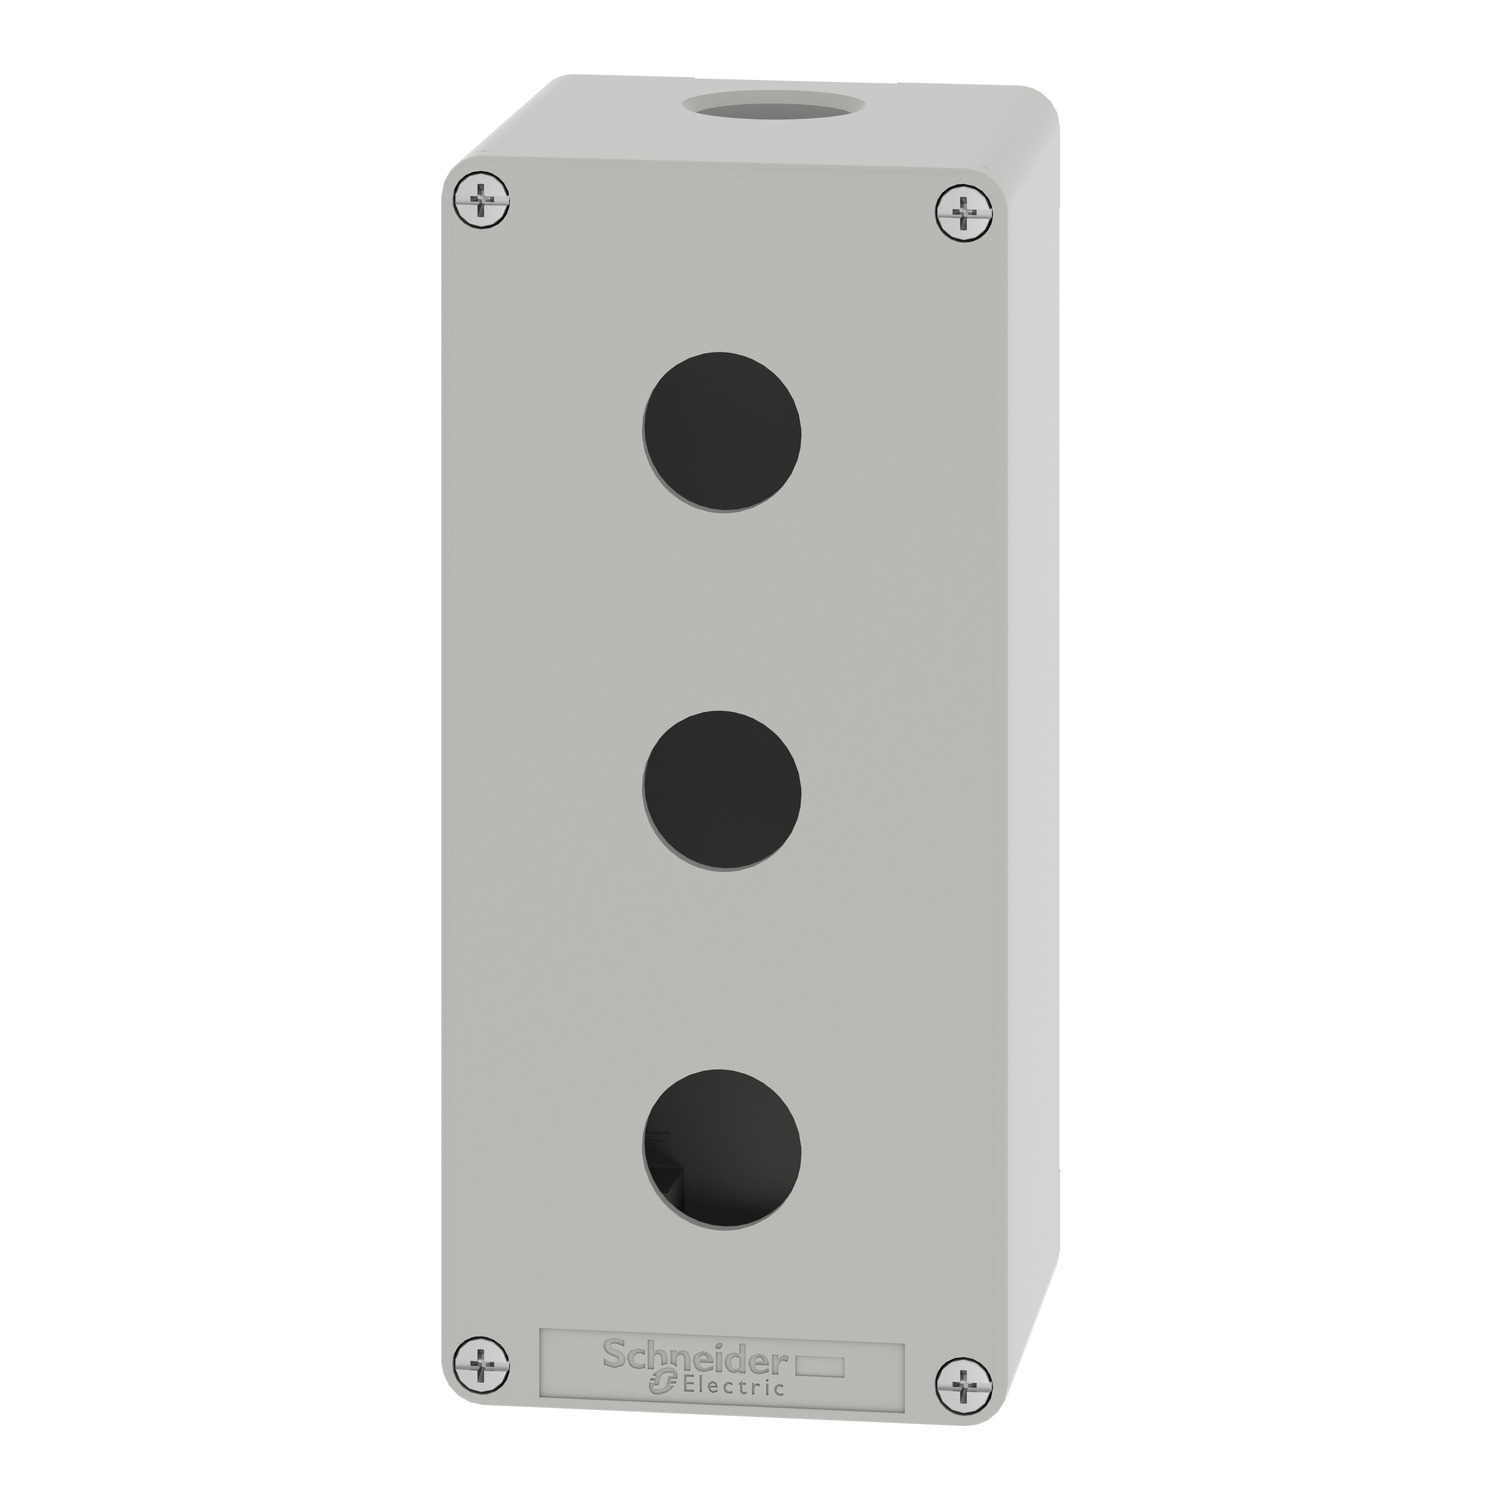 Push Button Switch Control Station Box 22mm 2 Button Hole Gray